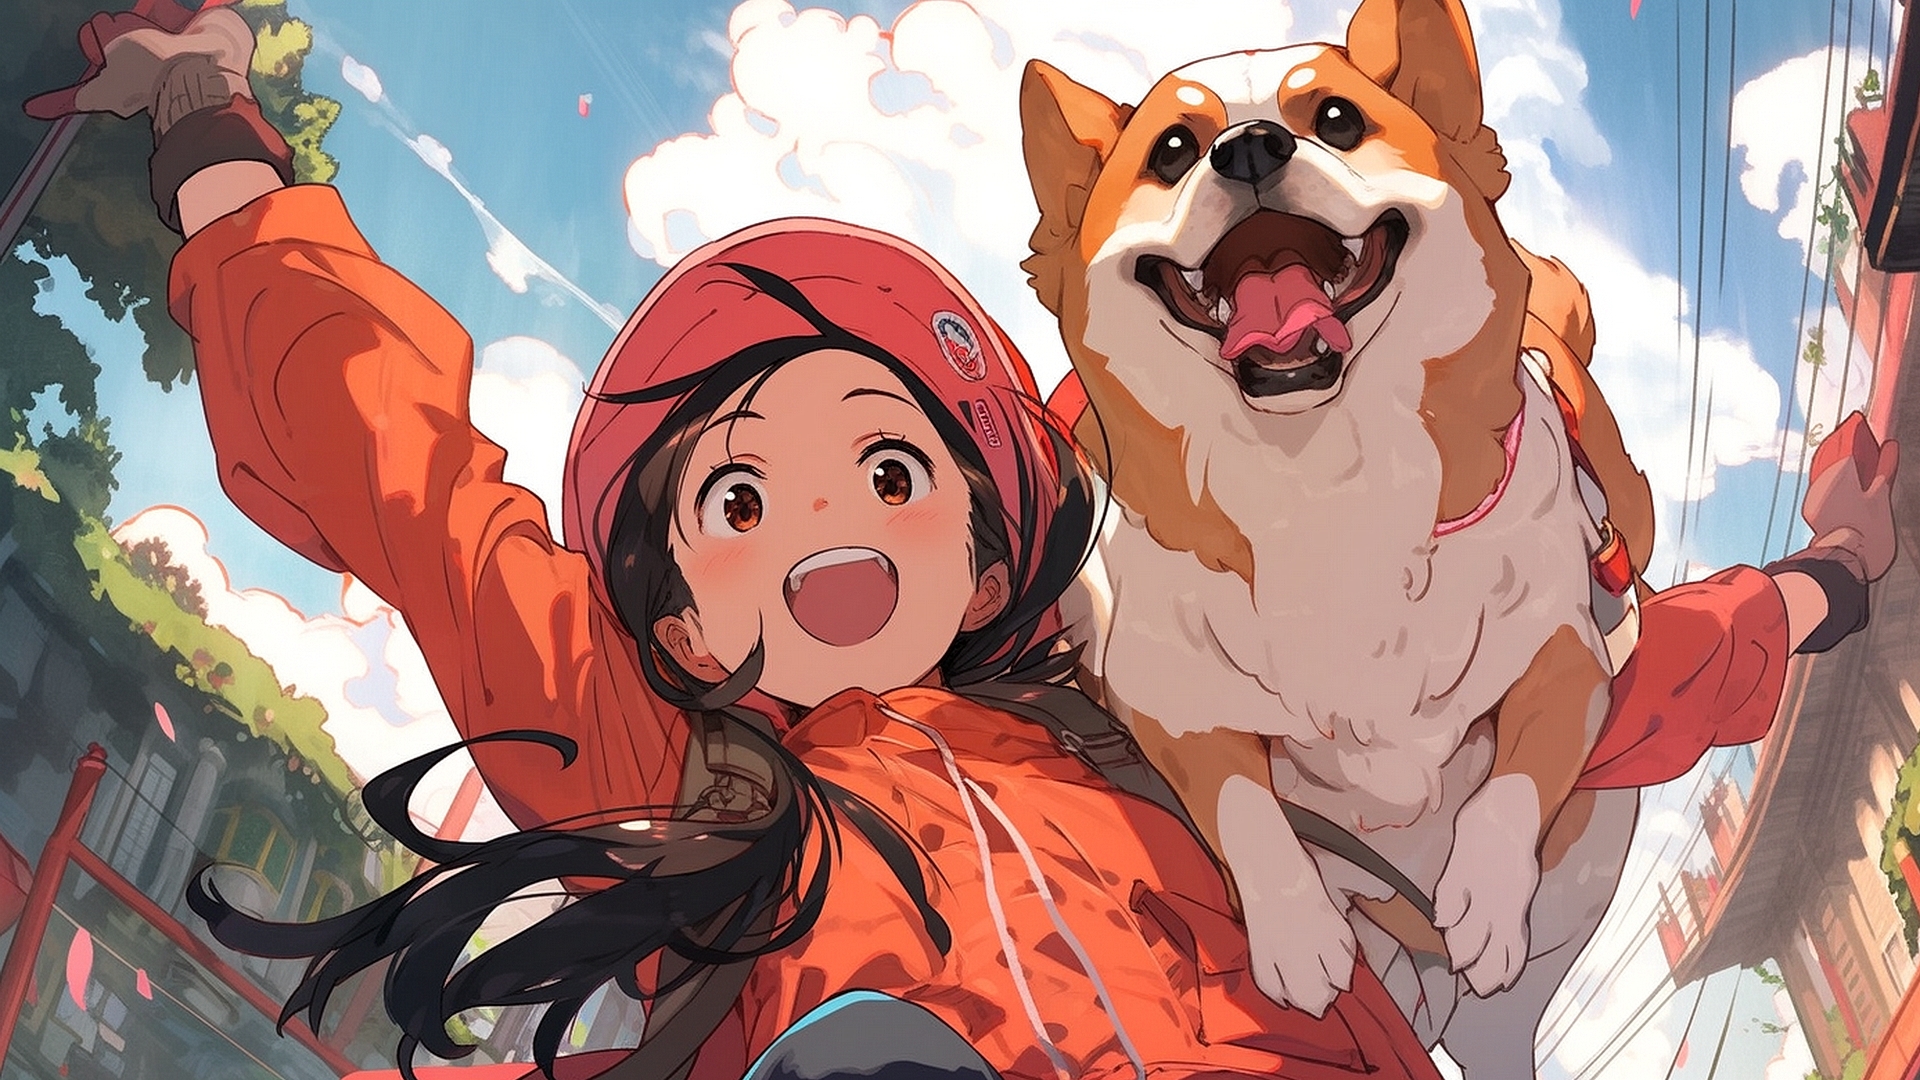 A drawing of a joyful girl and a dog